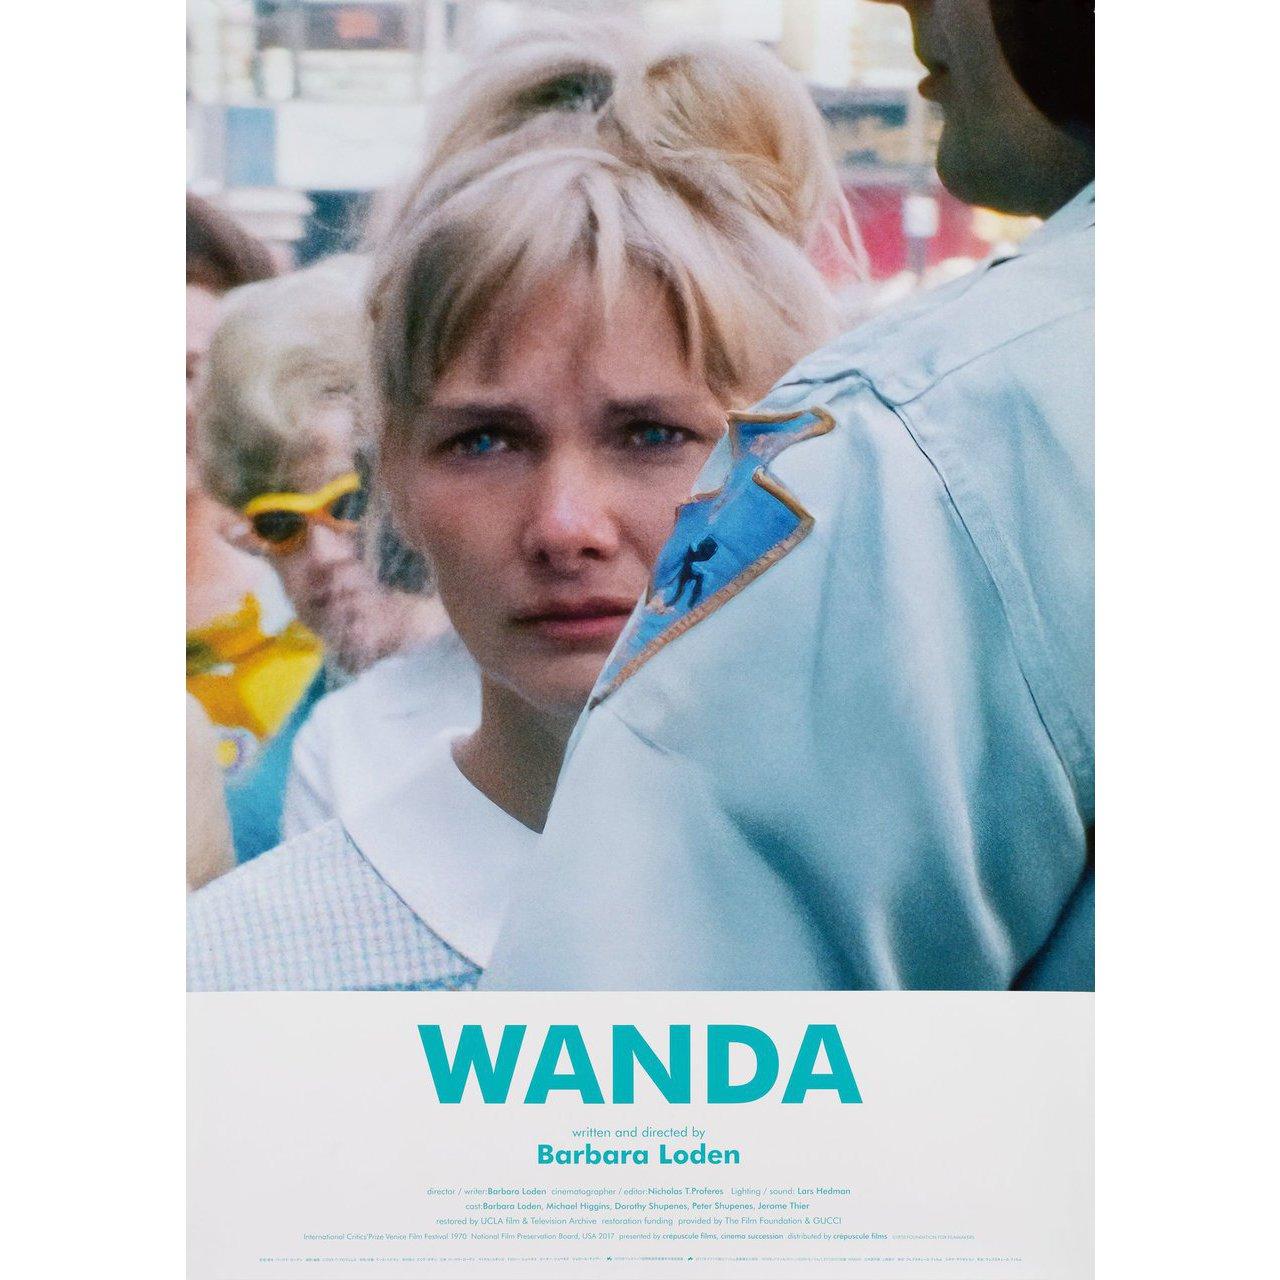 Original 2022 Japanese B2 poster for the first Japanese theatrical release of the 1970 film Wanda directed by Barbara Loden with Barbara Loden / Michael Higgins / Dorothy Shupenes / Peter Shupenes. Very Good-Fine condition, rolled. Please note: the